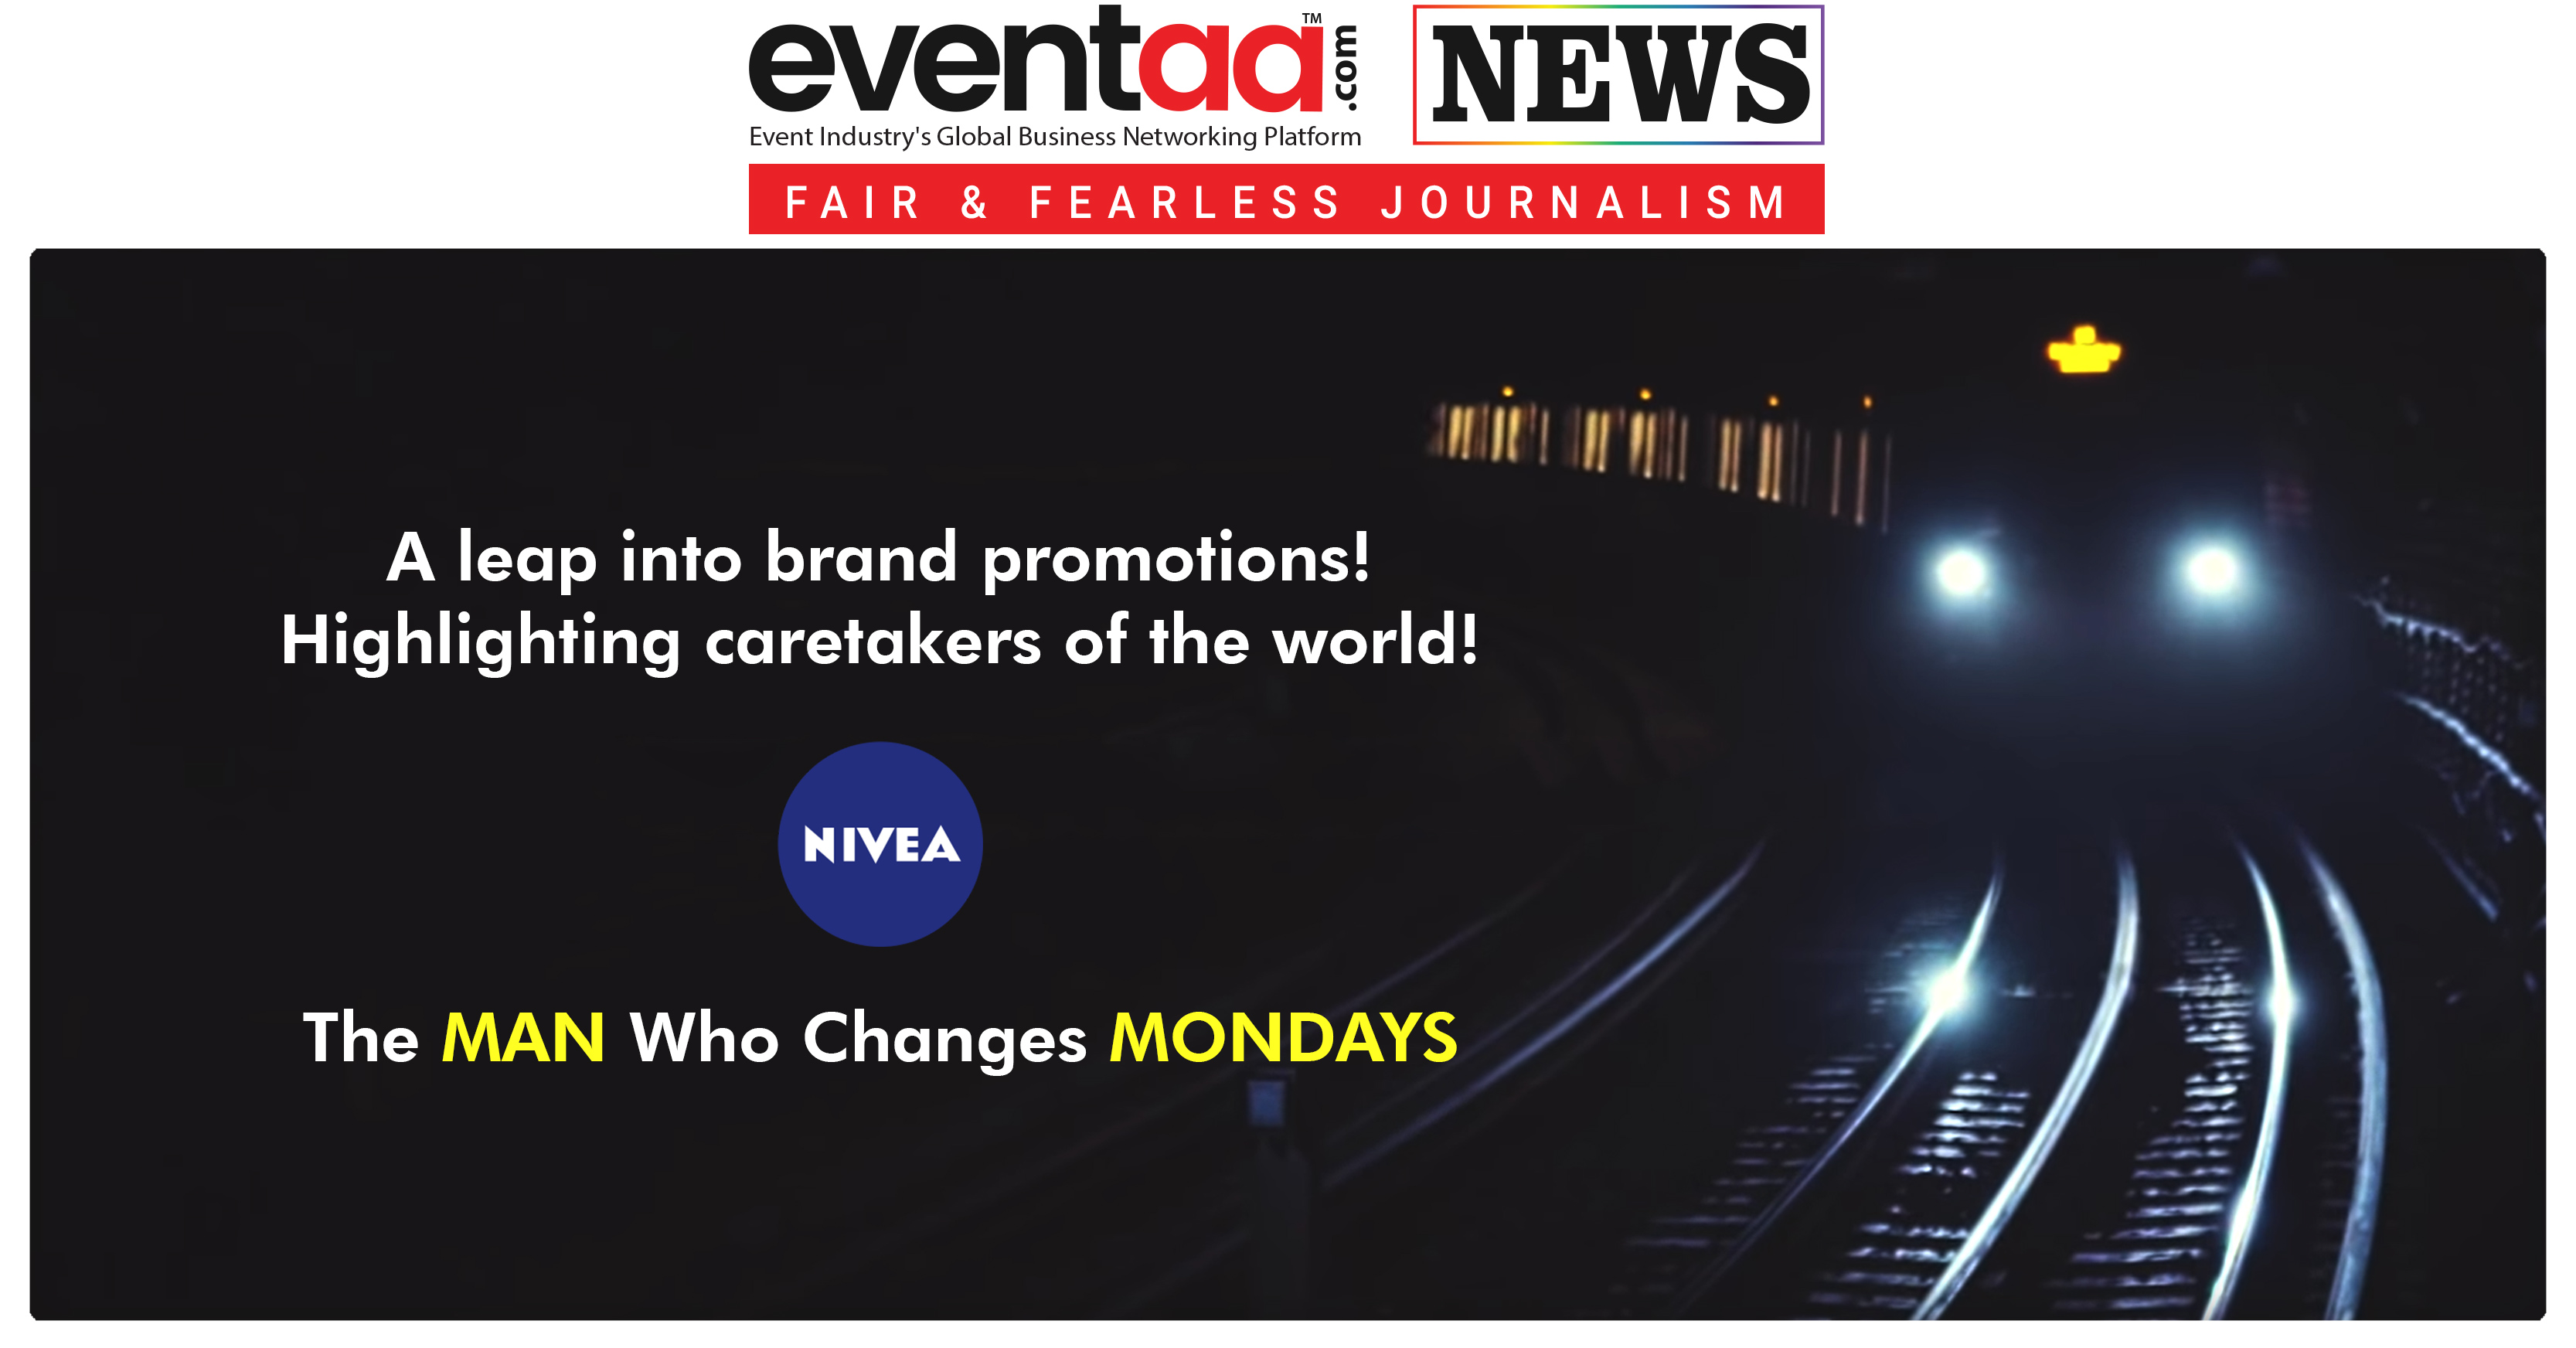 A leap into brand promotions! Highlighting caretakers of the world! Nivea Healthcare!